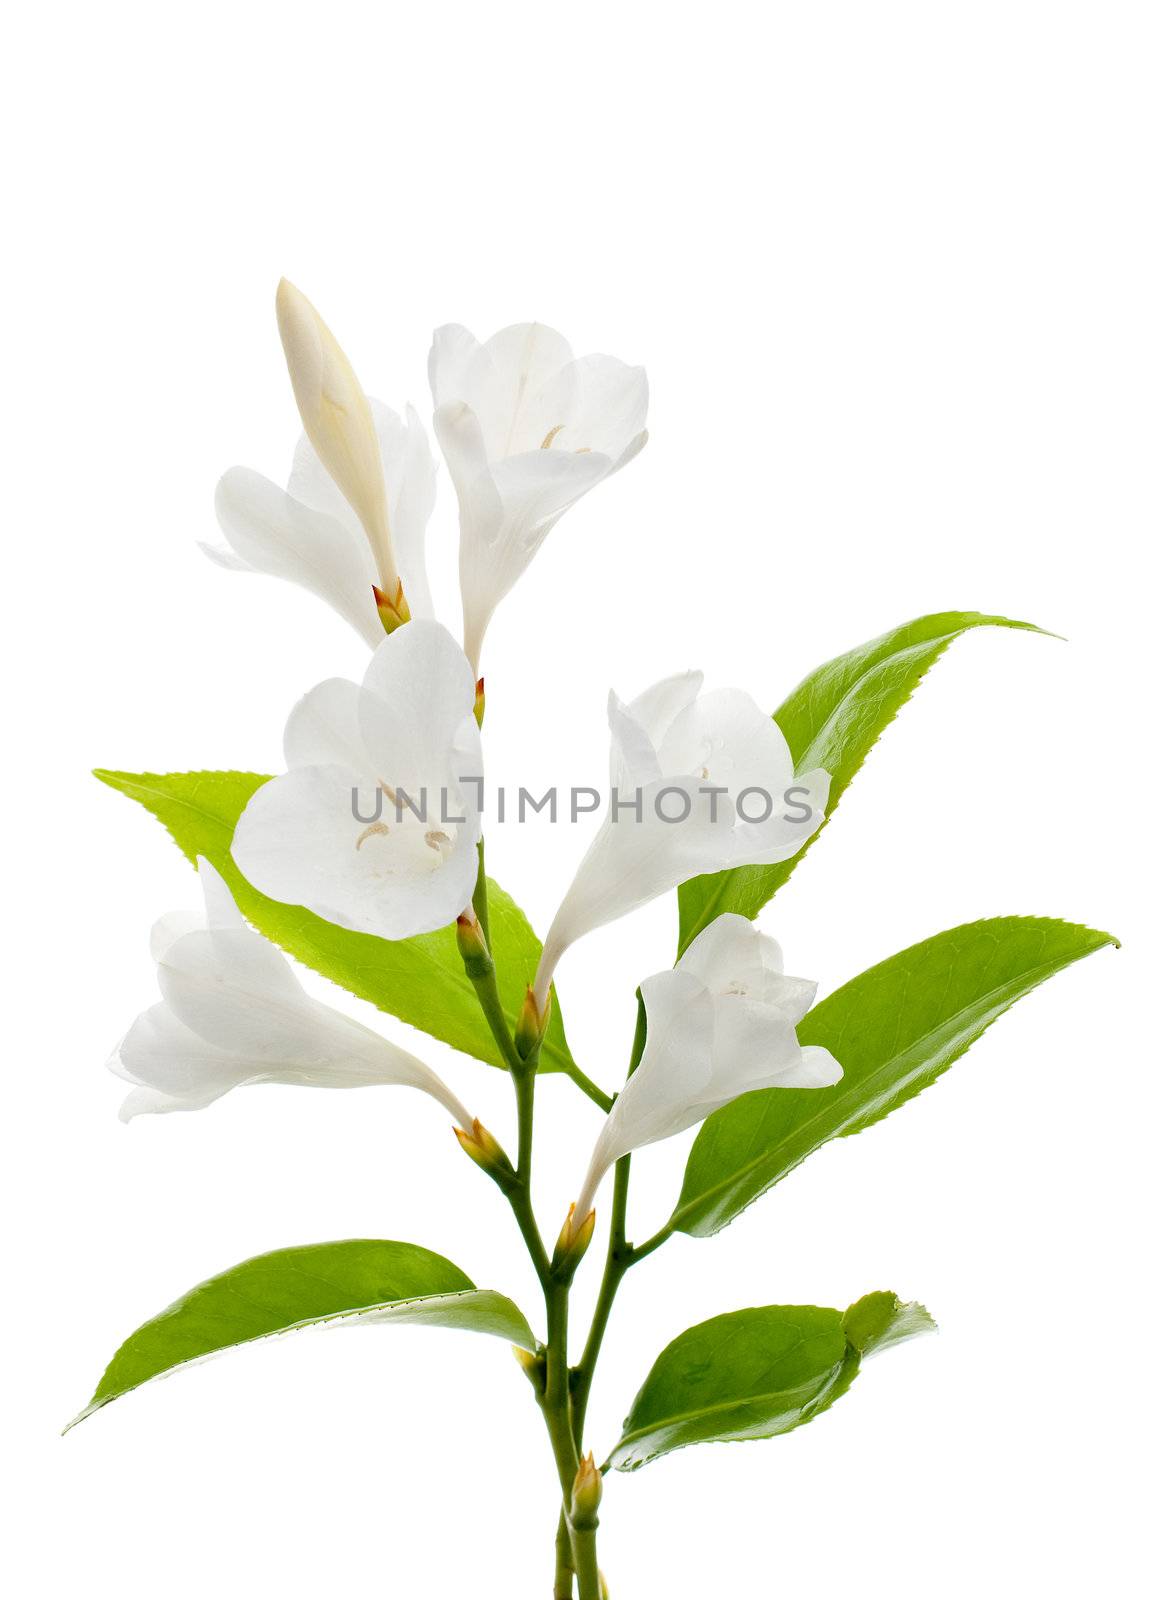 A fragment of white lilies ' bunch on a white background. zephyranthes candida